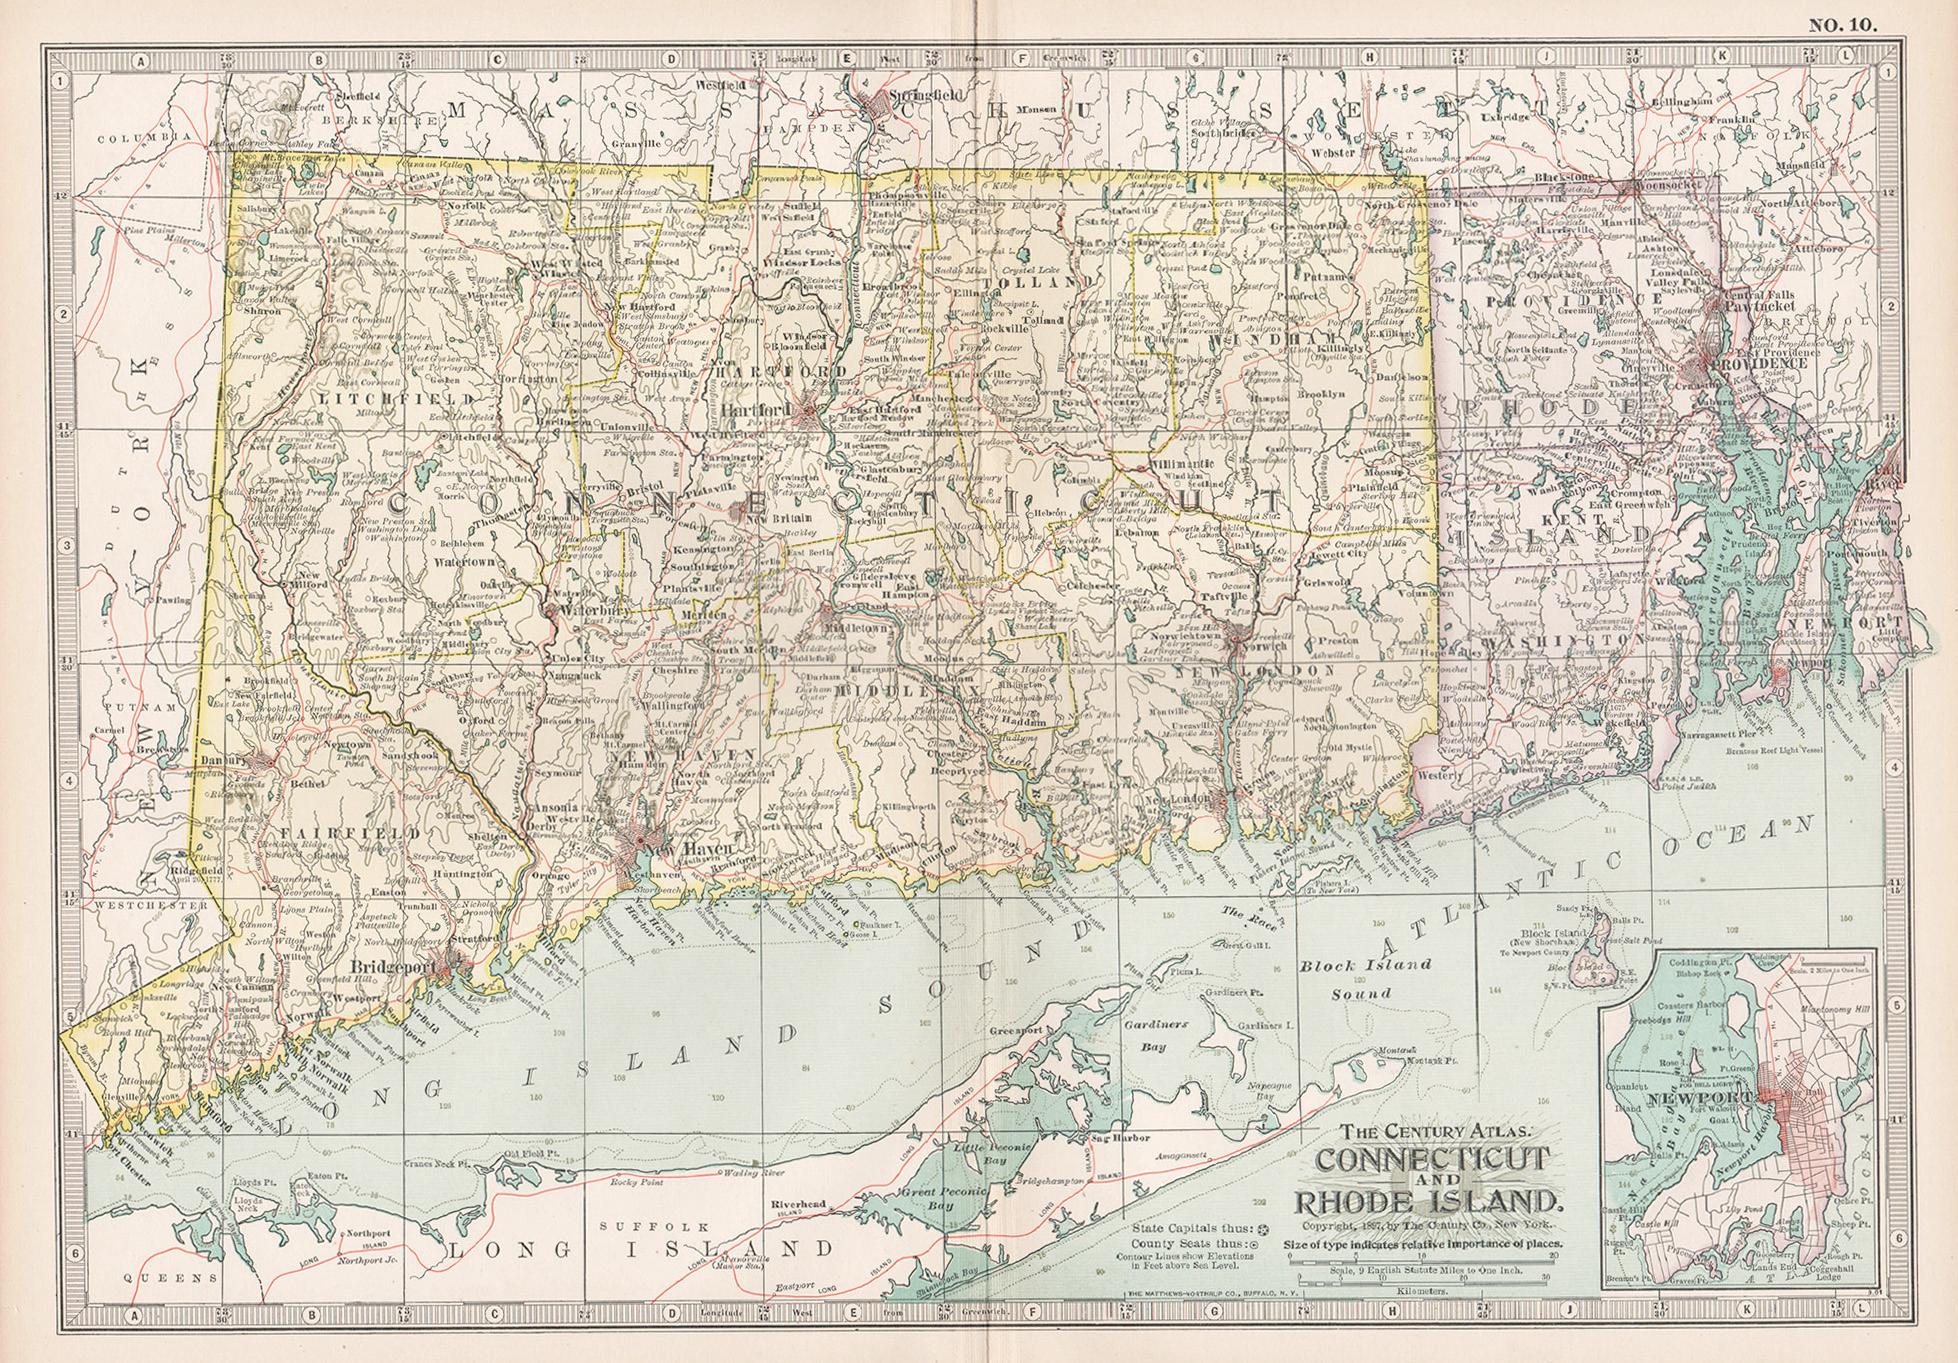 Connecticut and Rhode Island. USA. Century Atlas state antique vintage map